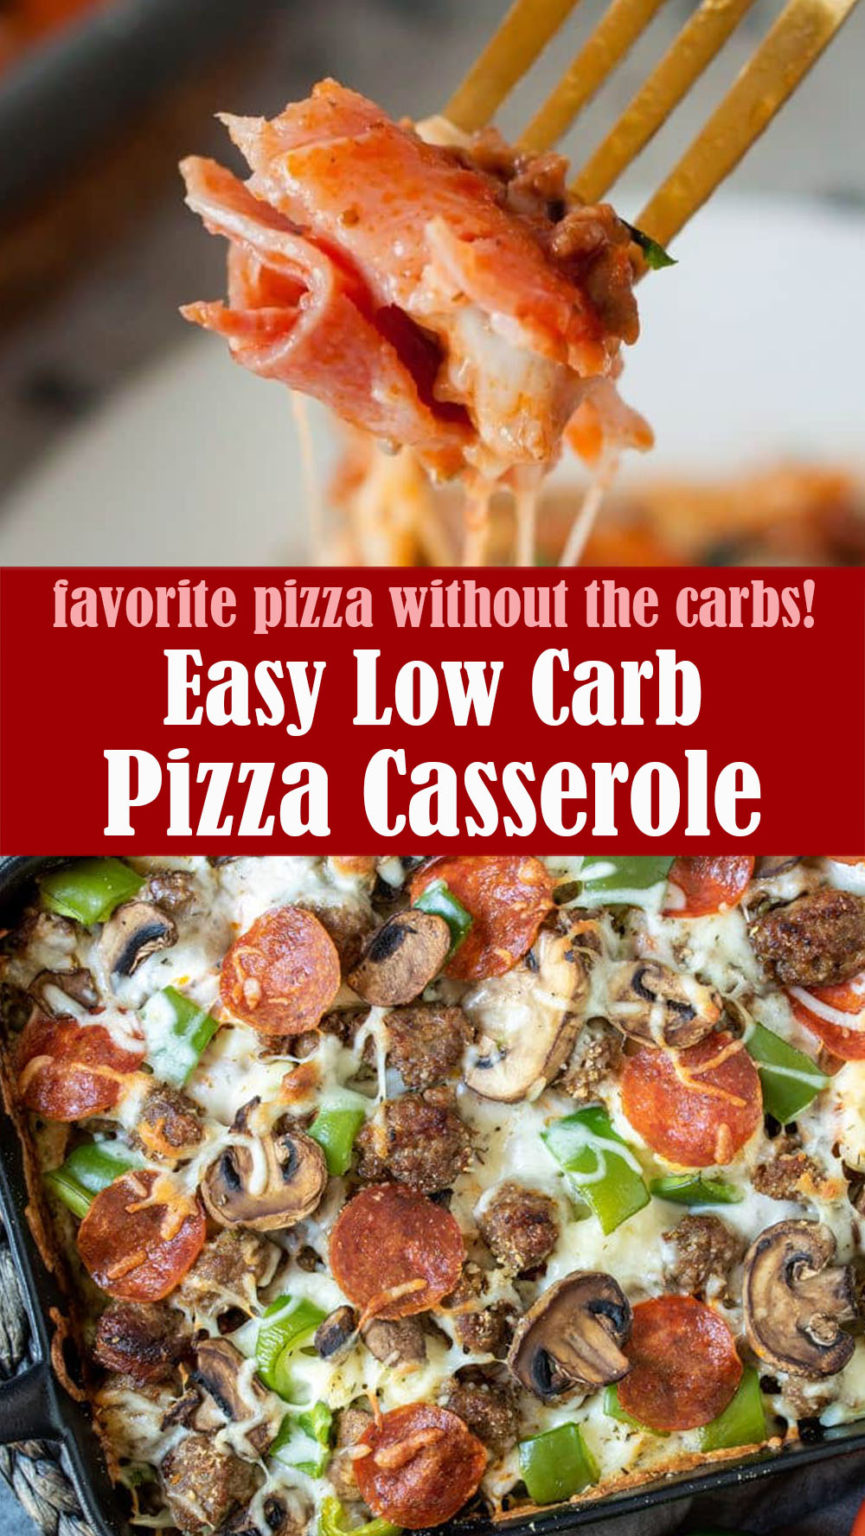 Easy Low Carb Pizza Casserole – Reserveamana